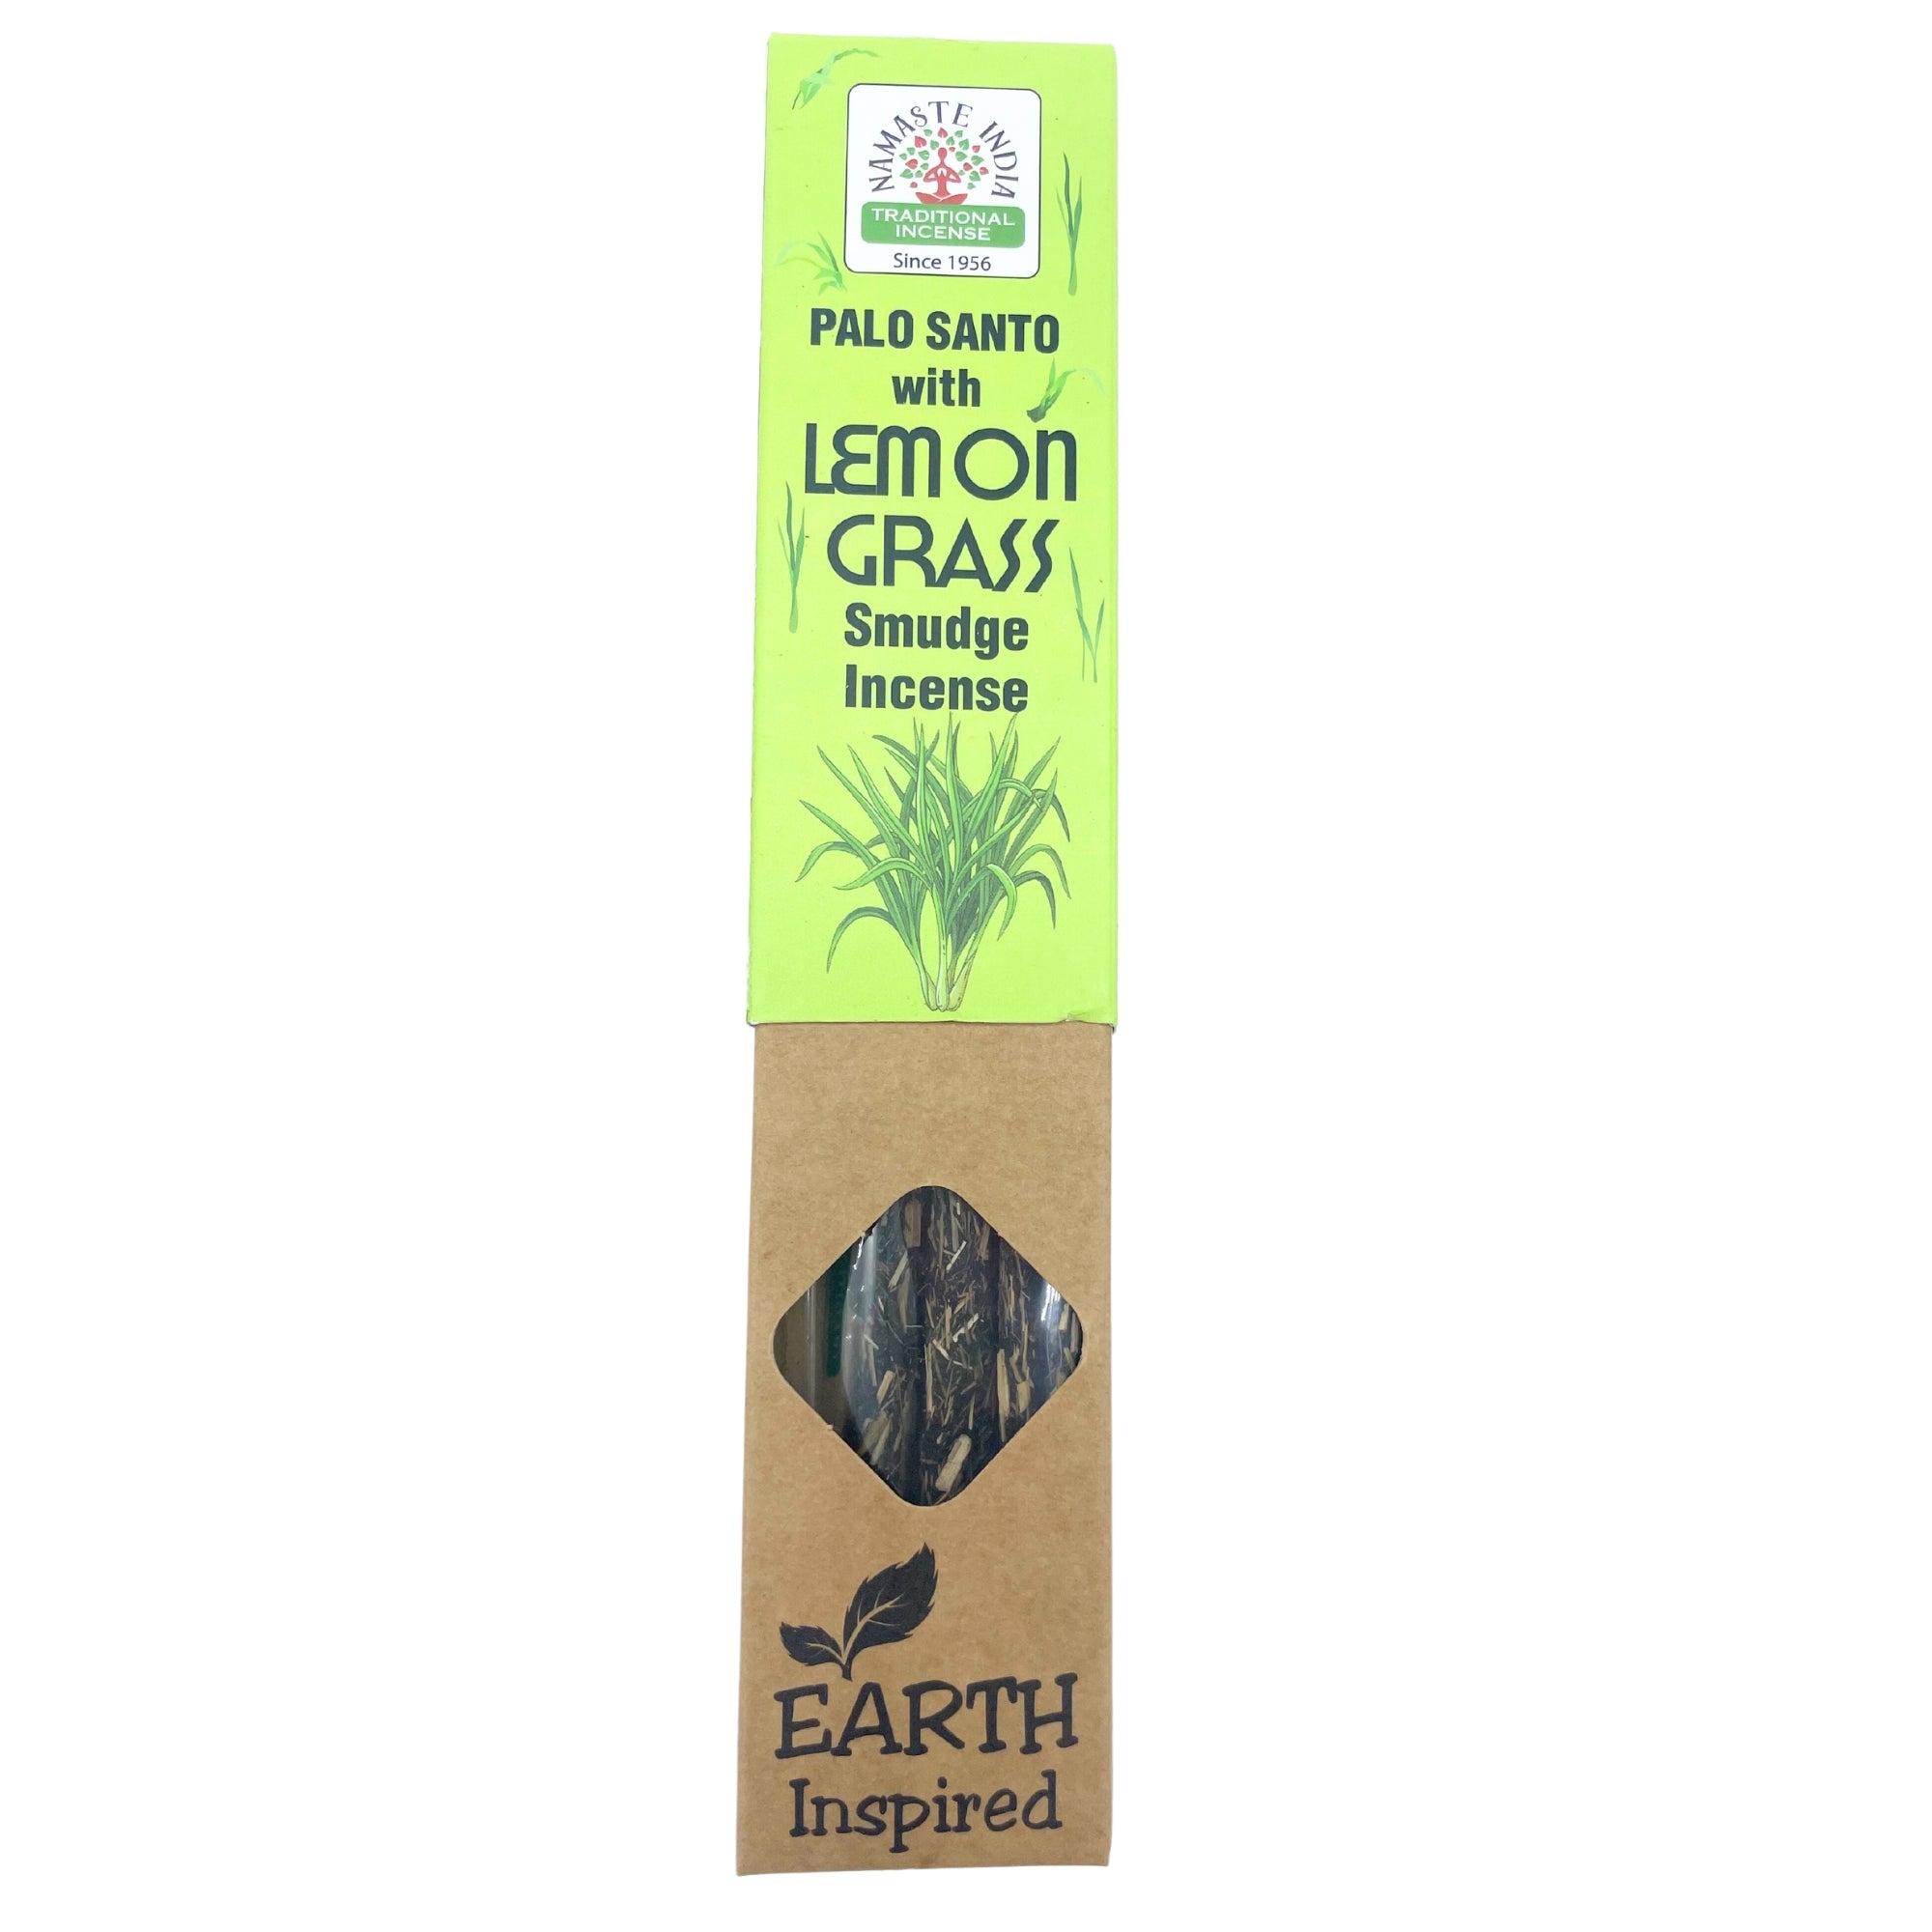 View Earth Inspired Smudge Incense Lemon Grass information